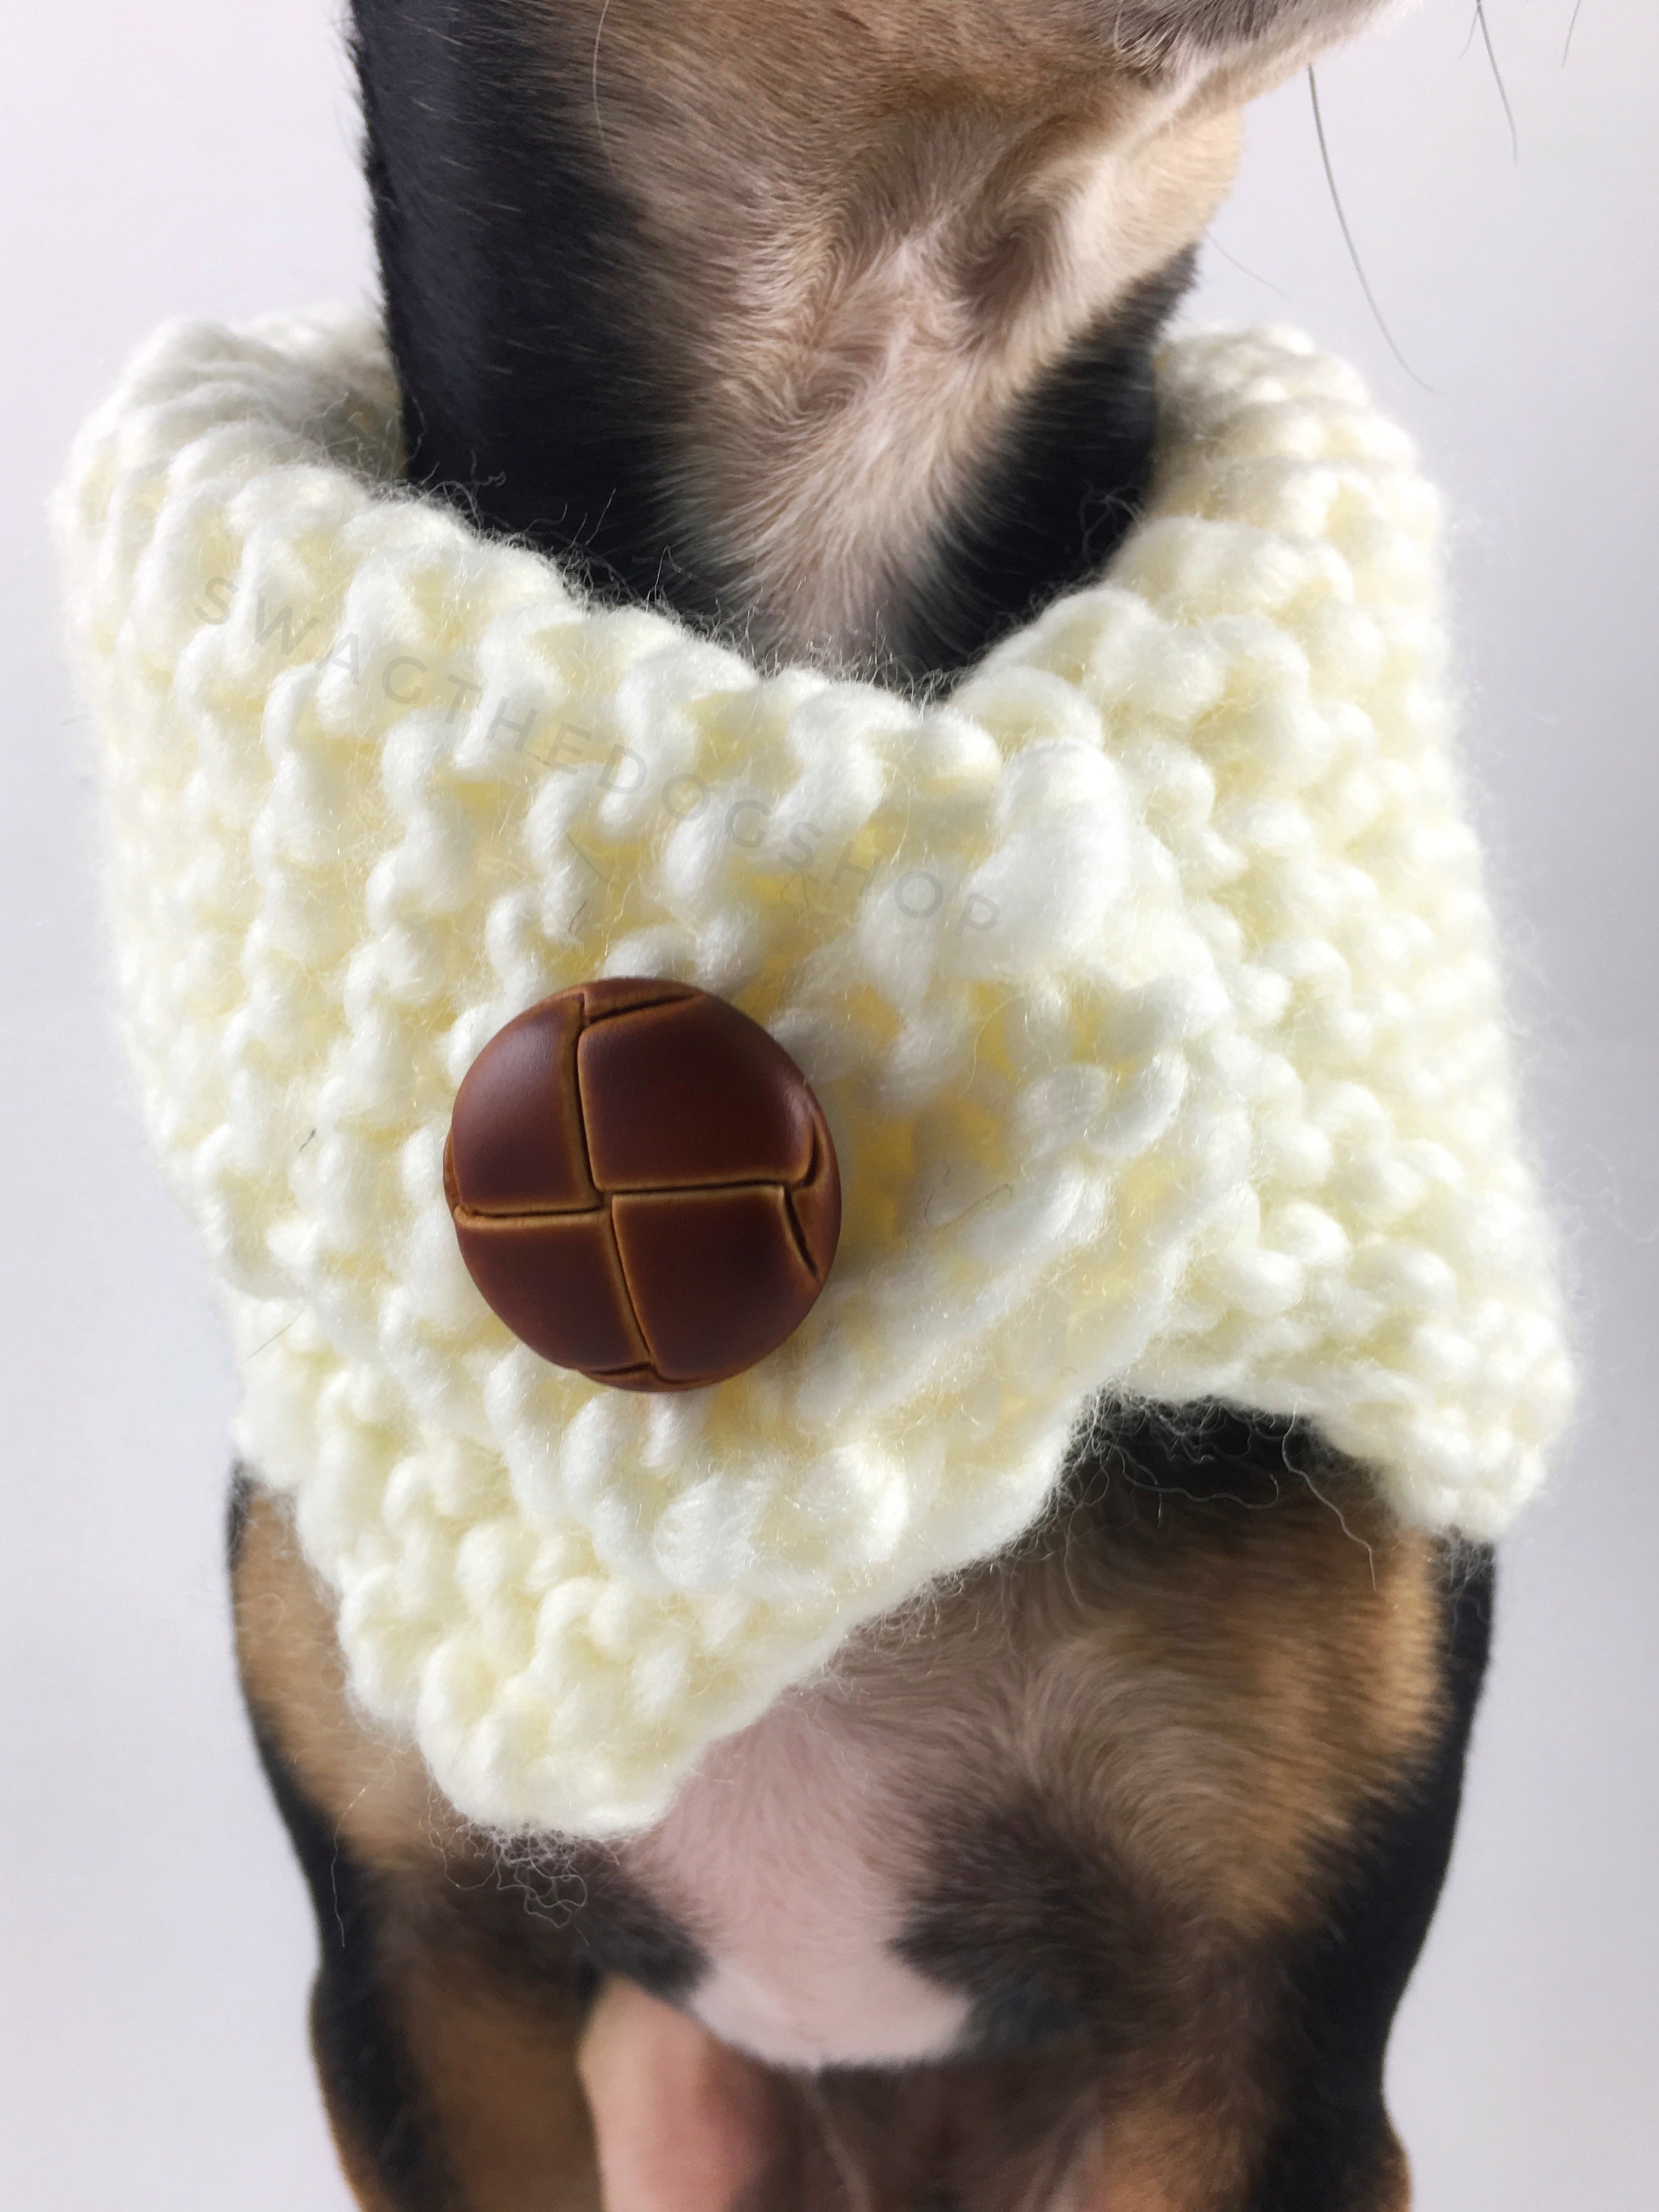 Winter Cream Swagsnood - Close Up Neck View of Cute Chihuahua Dog Wearing Winter Cream Color Dog Snood with Accent Button